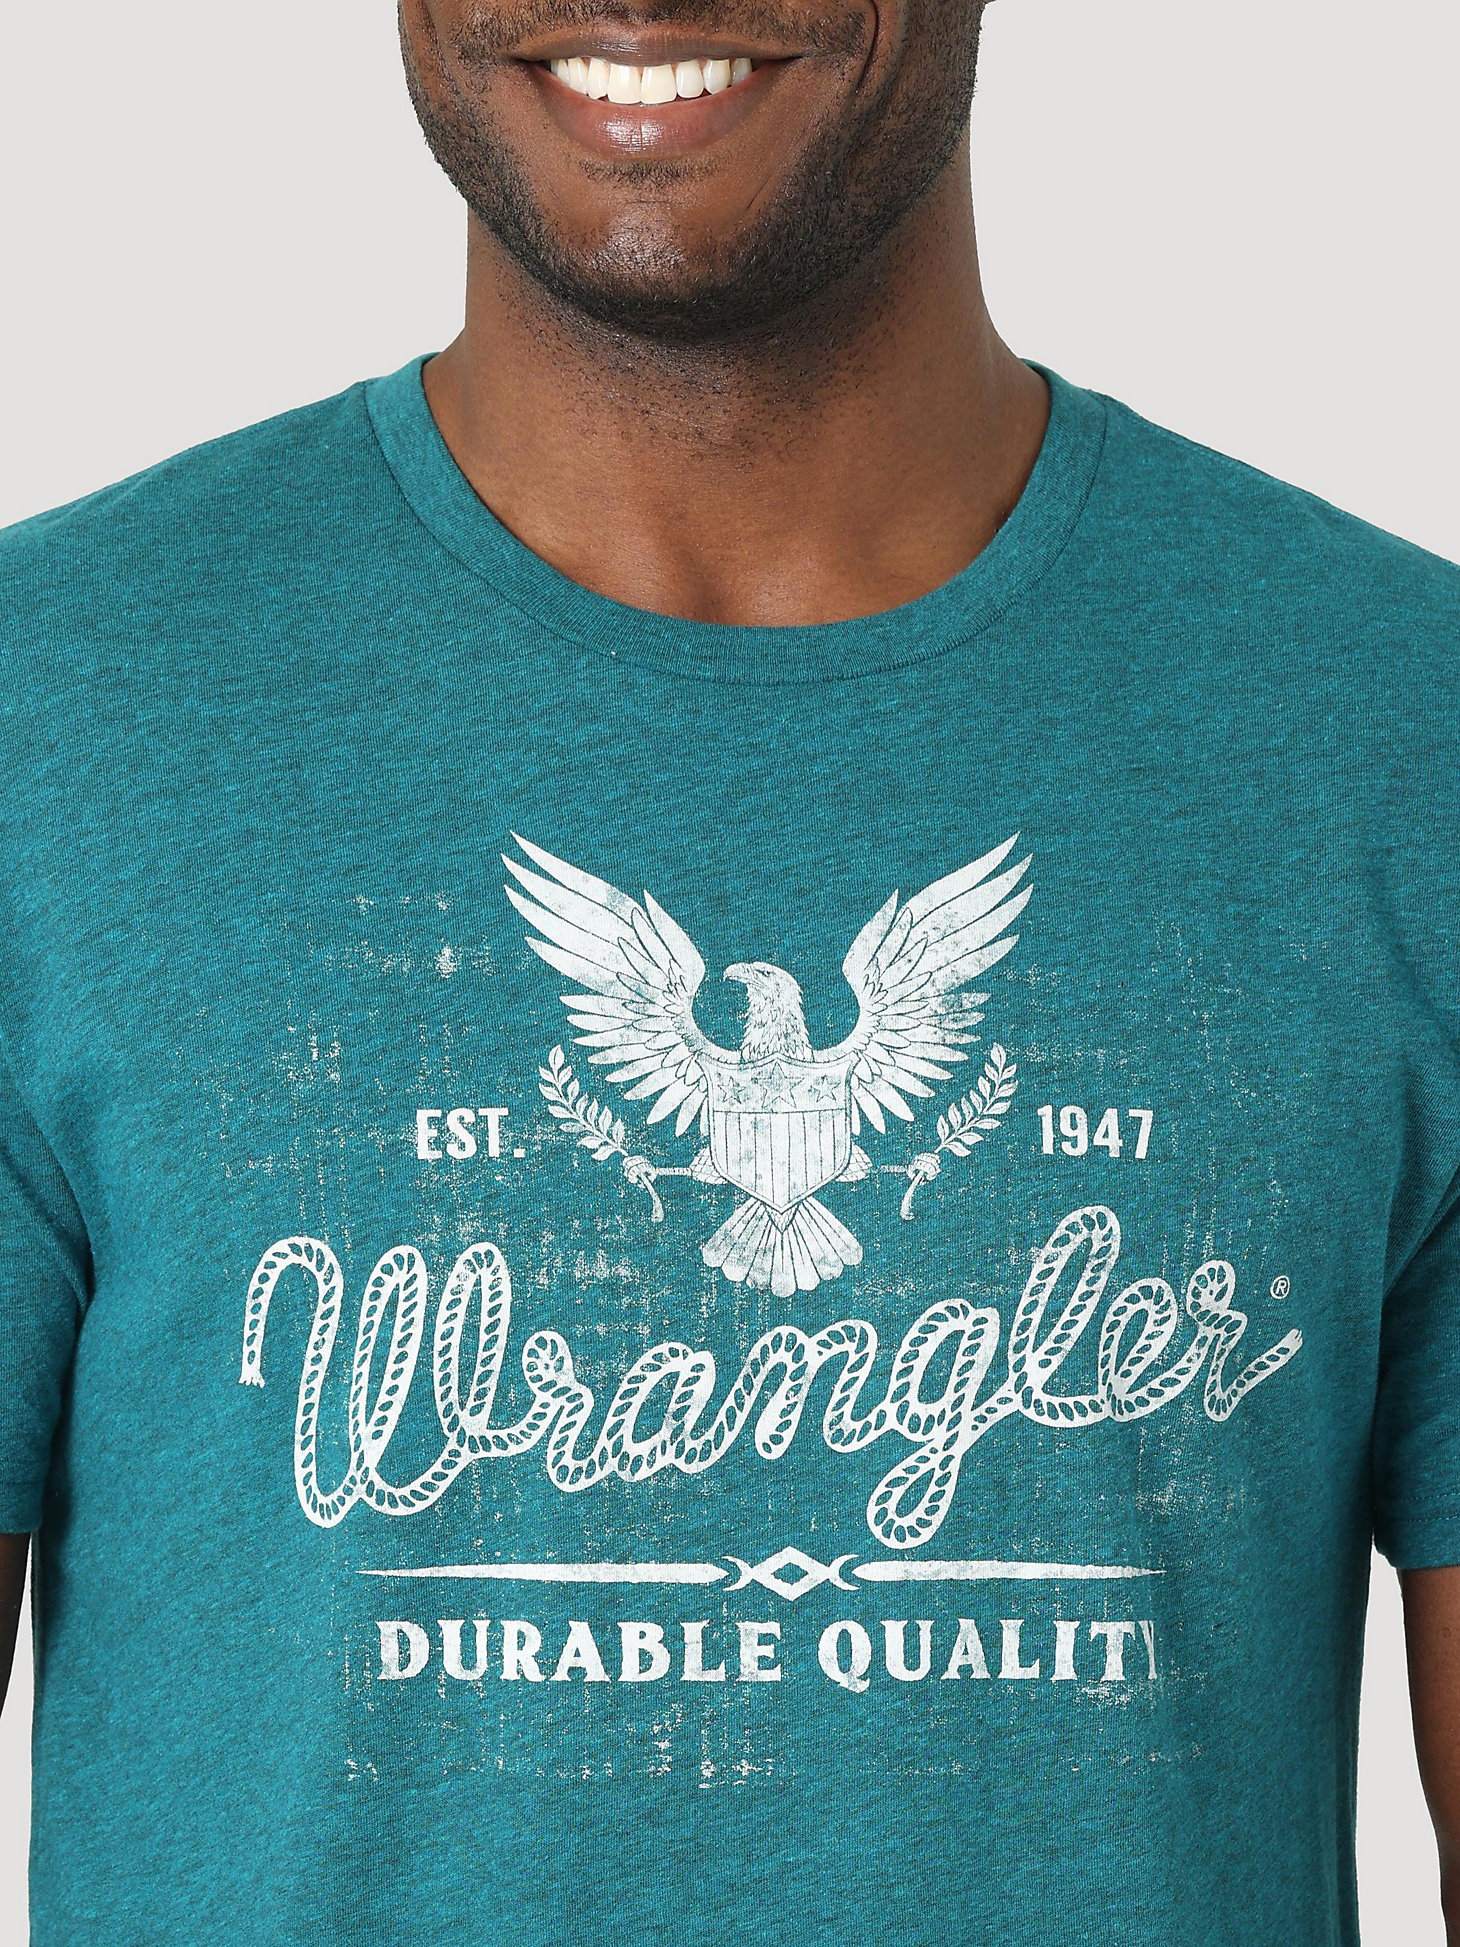 Men's Wrangler Eagle Durable Quality Graphic T-Shirt in Cyan Pepper Heather alternative view 1